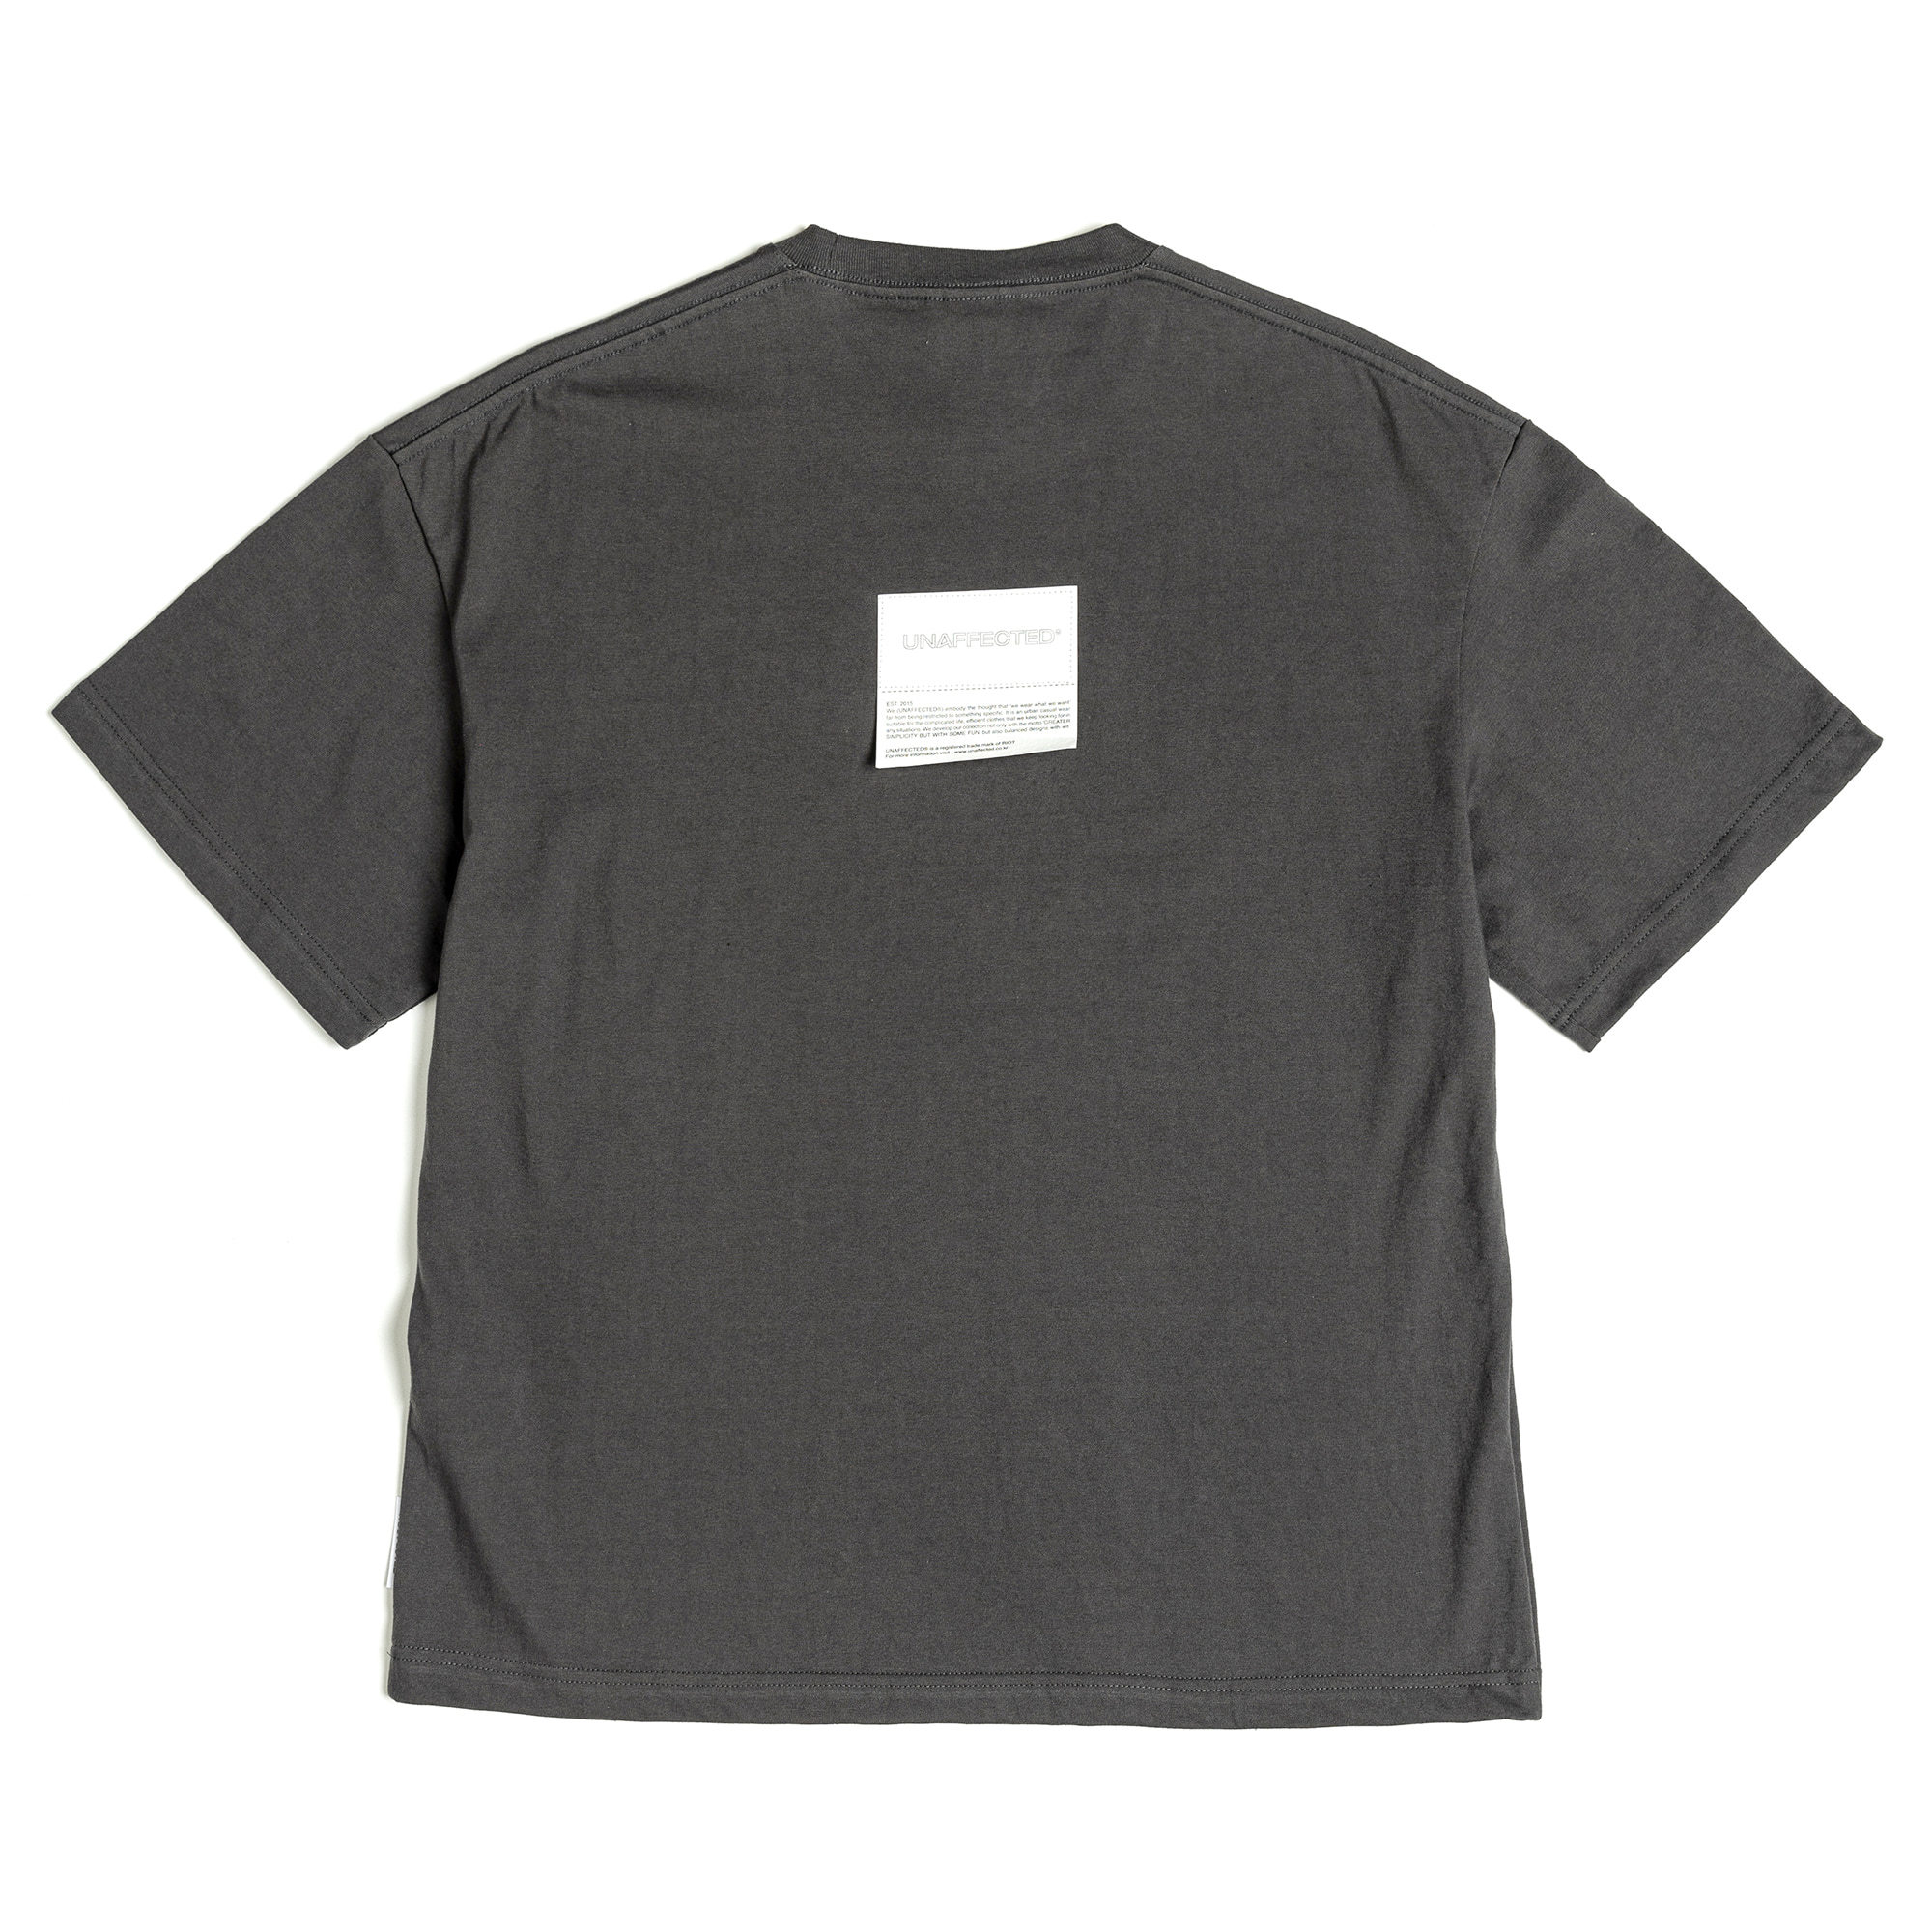 UNAFFECTED - LOGO PATCH T-SHIRT / 2 COLORS